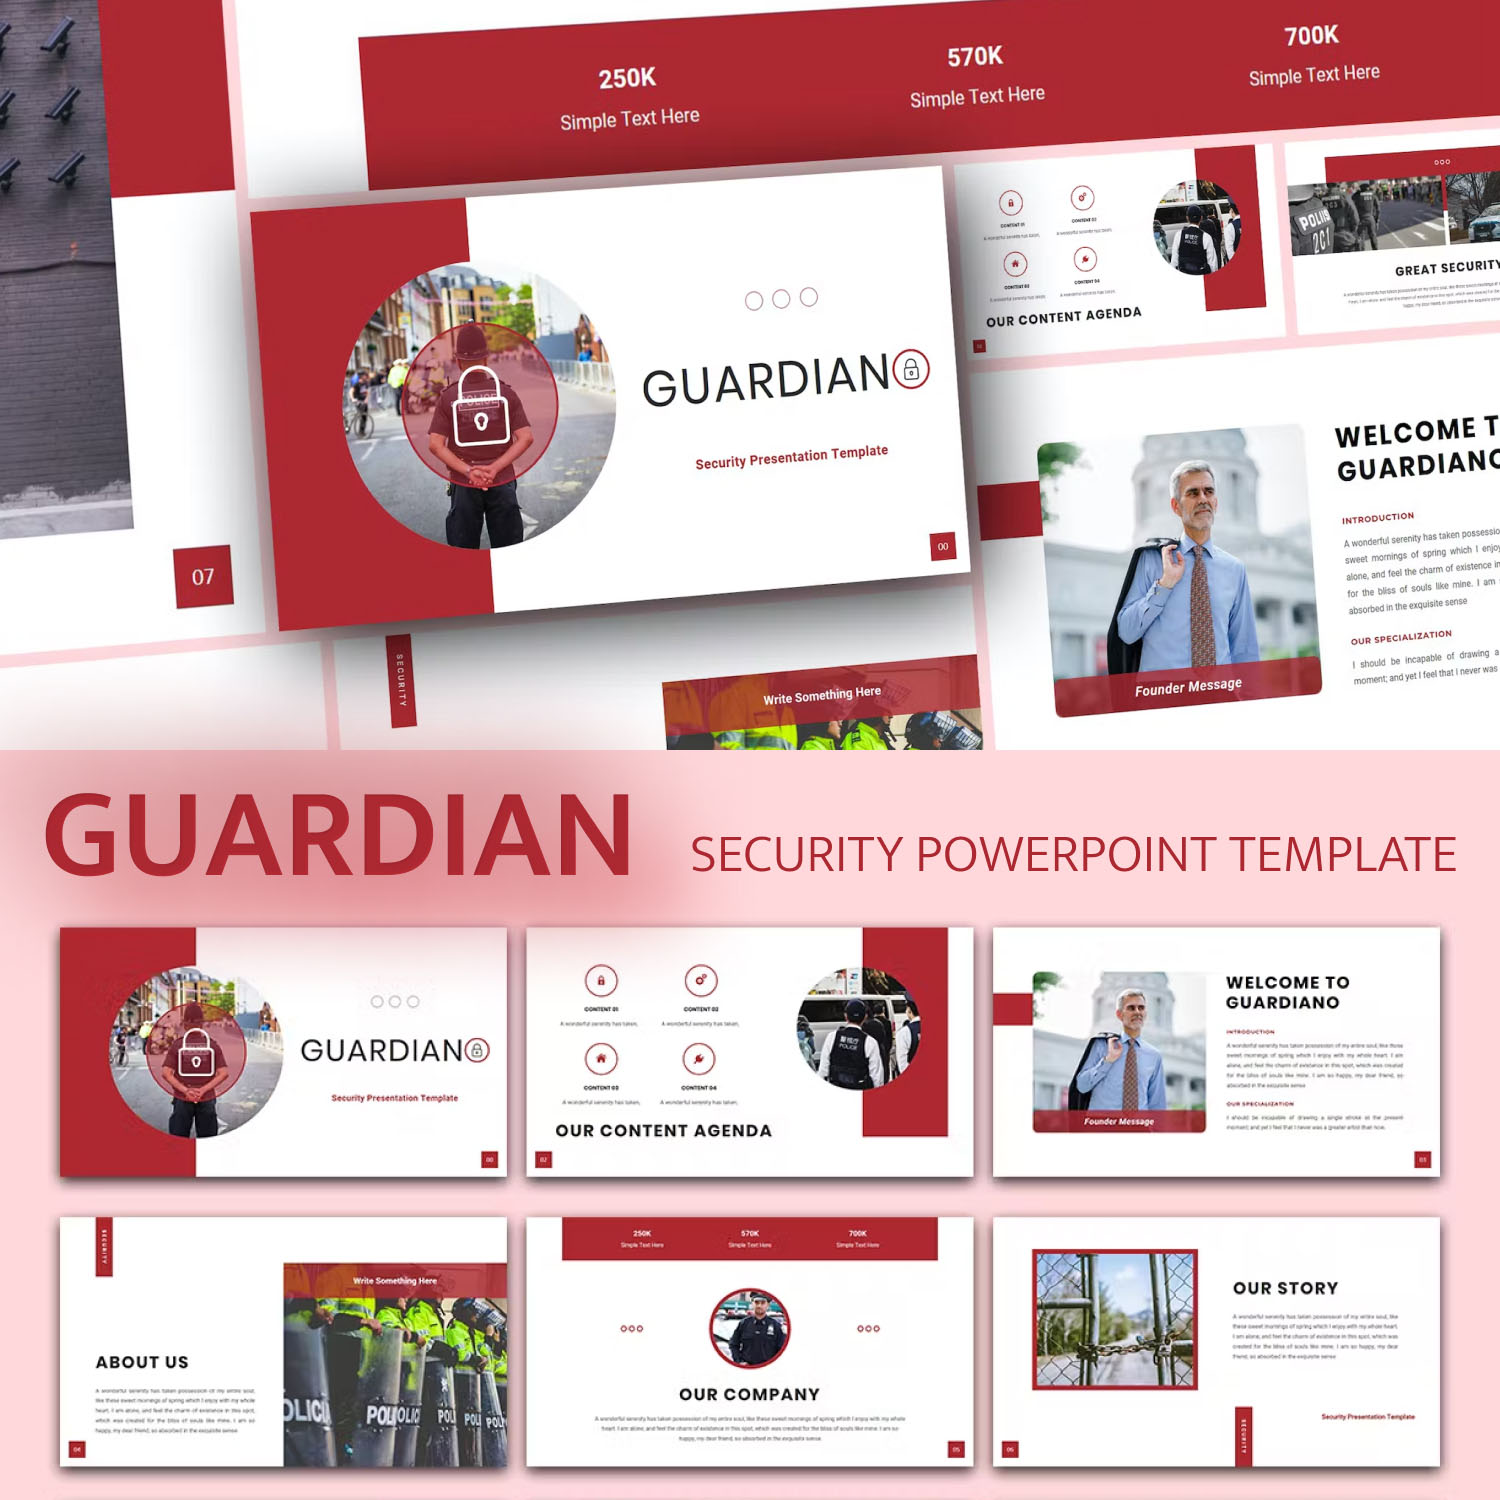 Prints of guardian security powerpoint template.